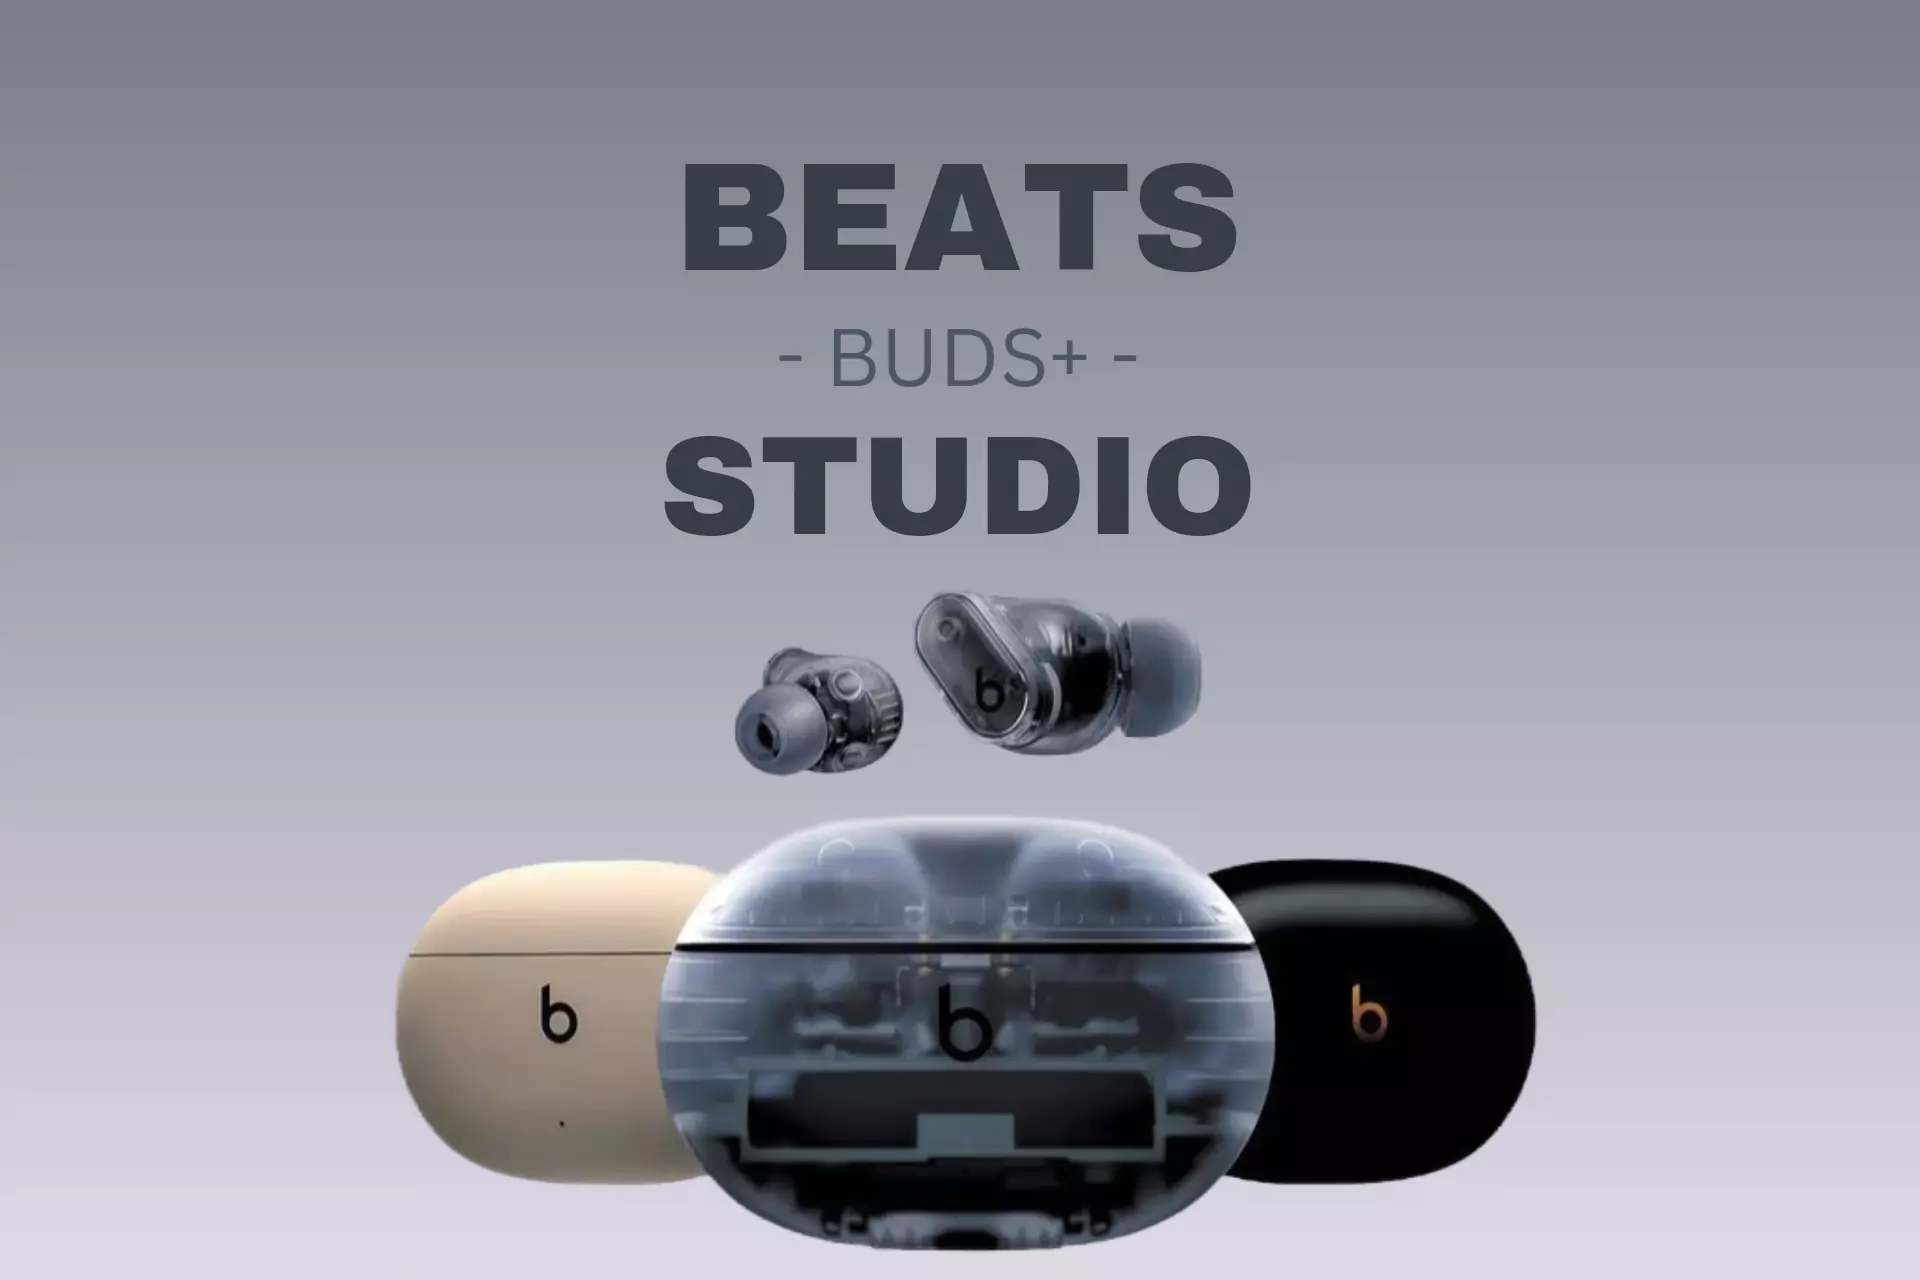 You are currently viewing Apple’s Beats Studio Buds+ with ANC and Transparency Mode: The Next Generation of True Wireless Earbuds